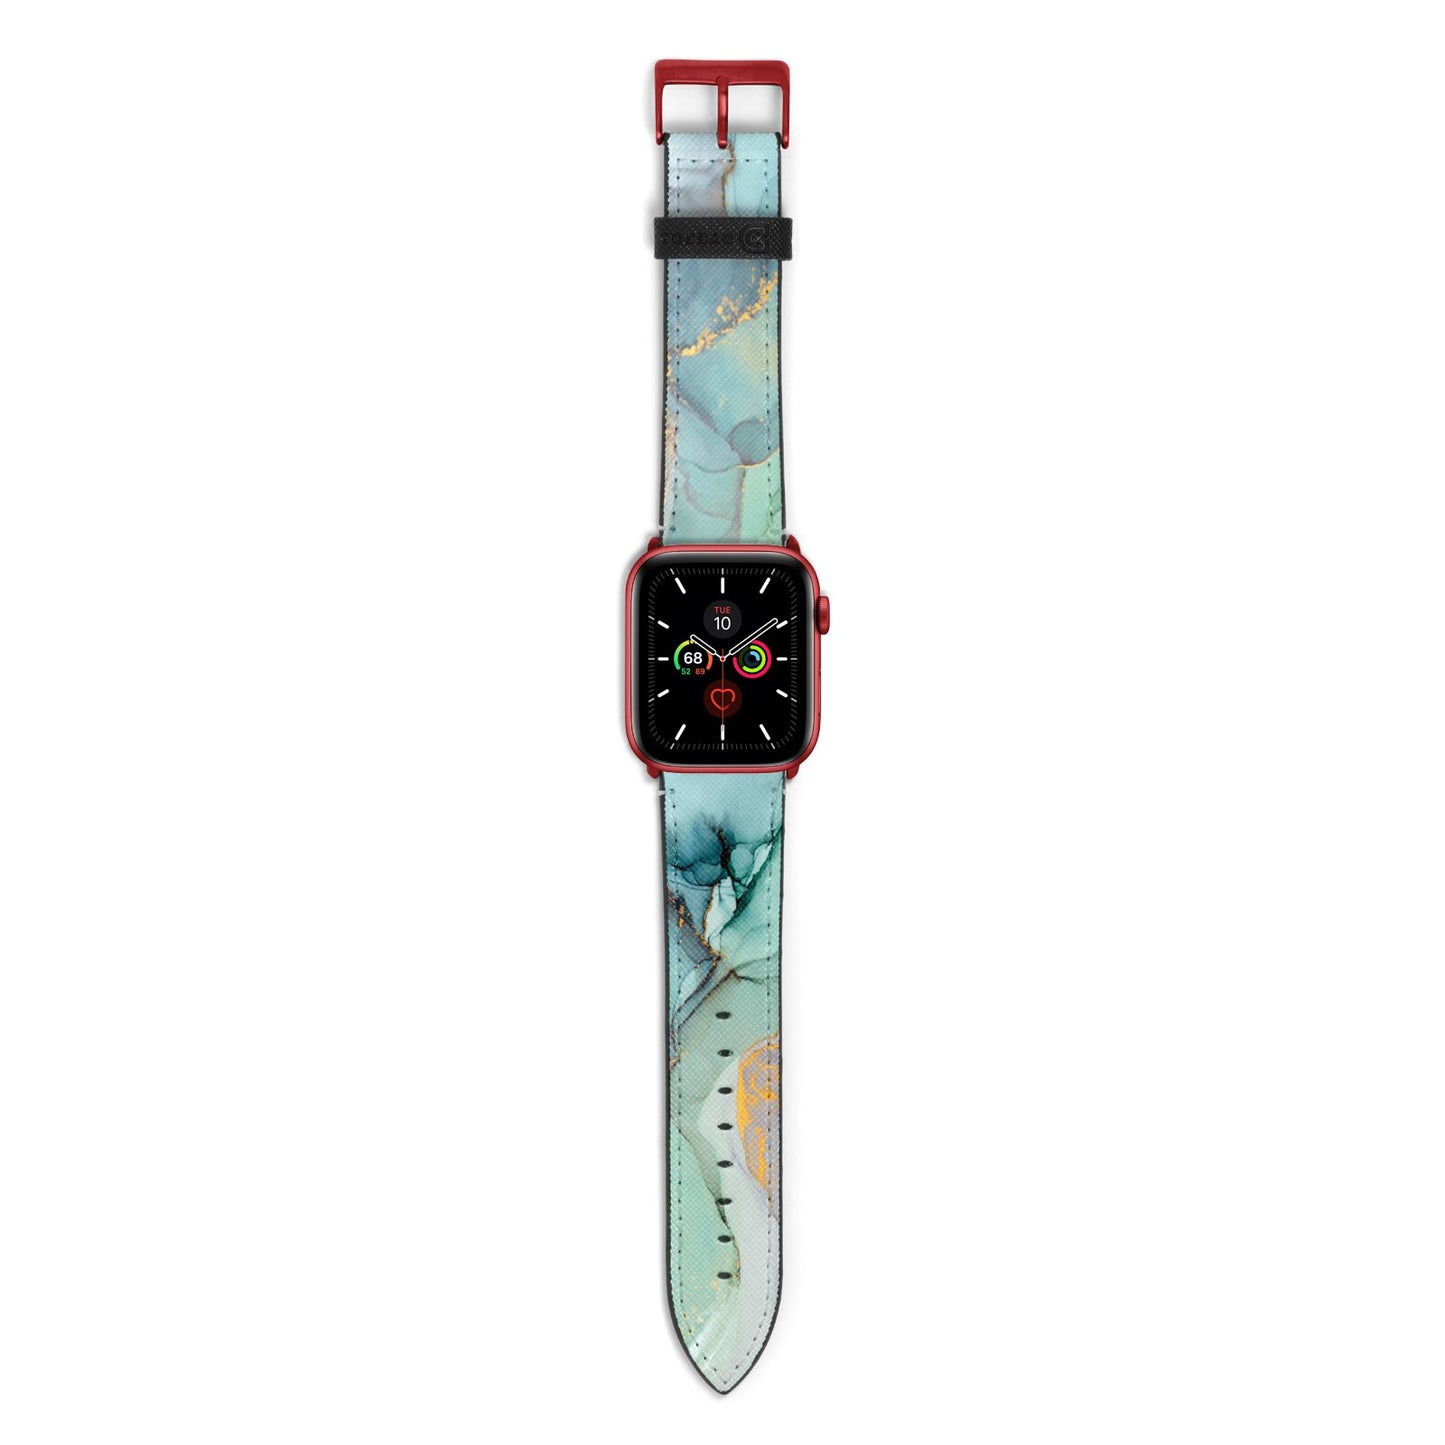 Marble Pattern Apple Watch Strap with Red Hardware